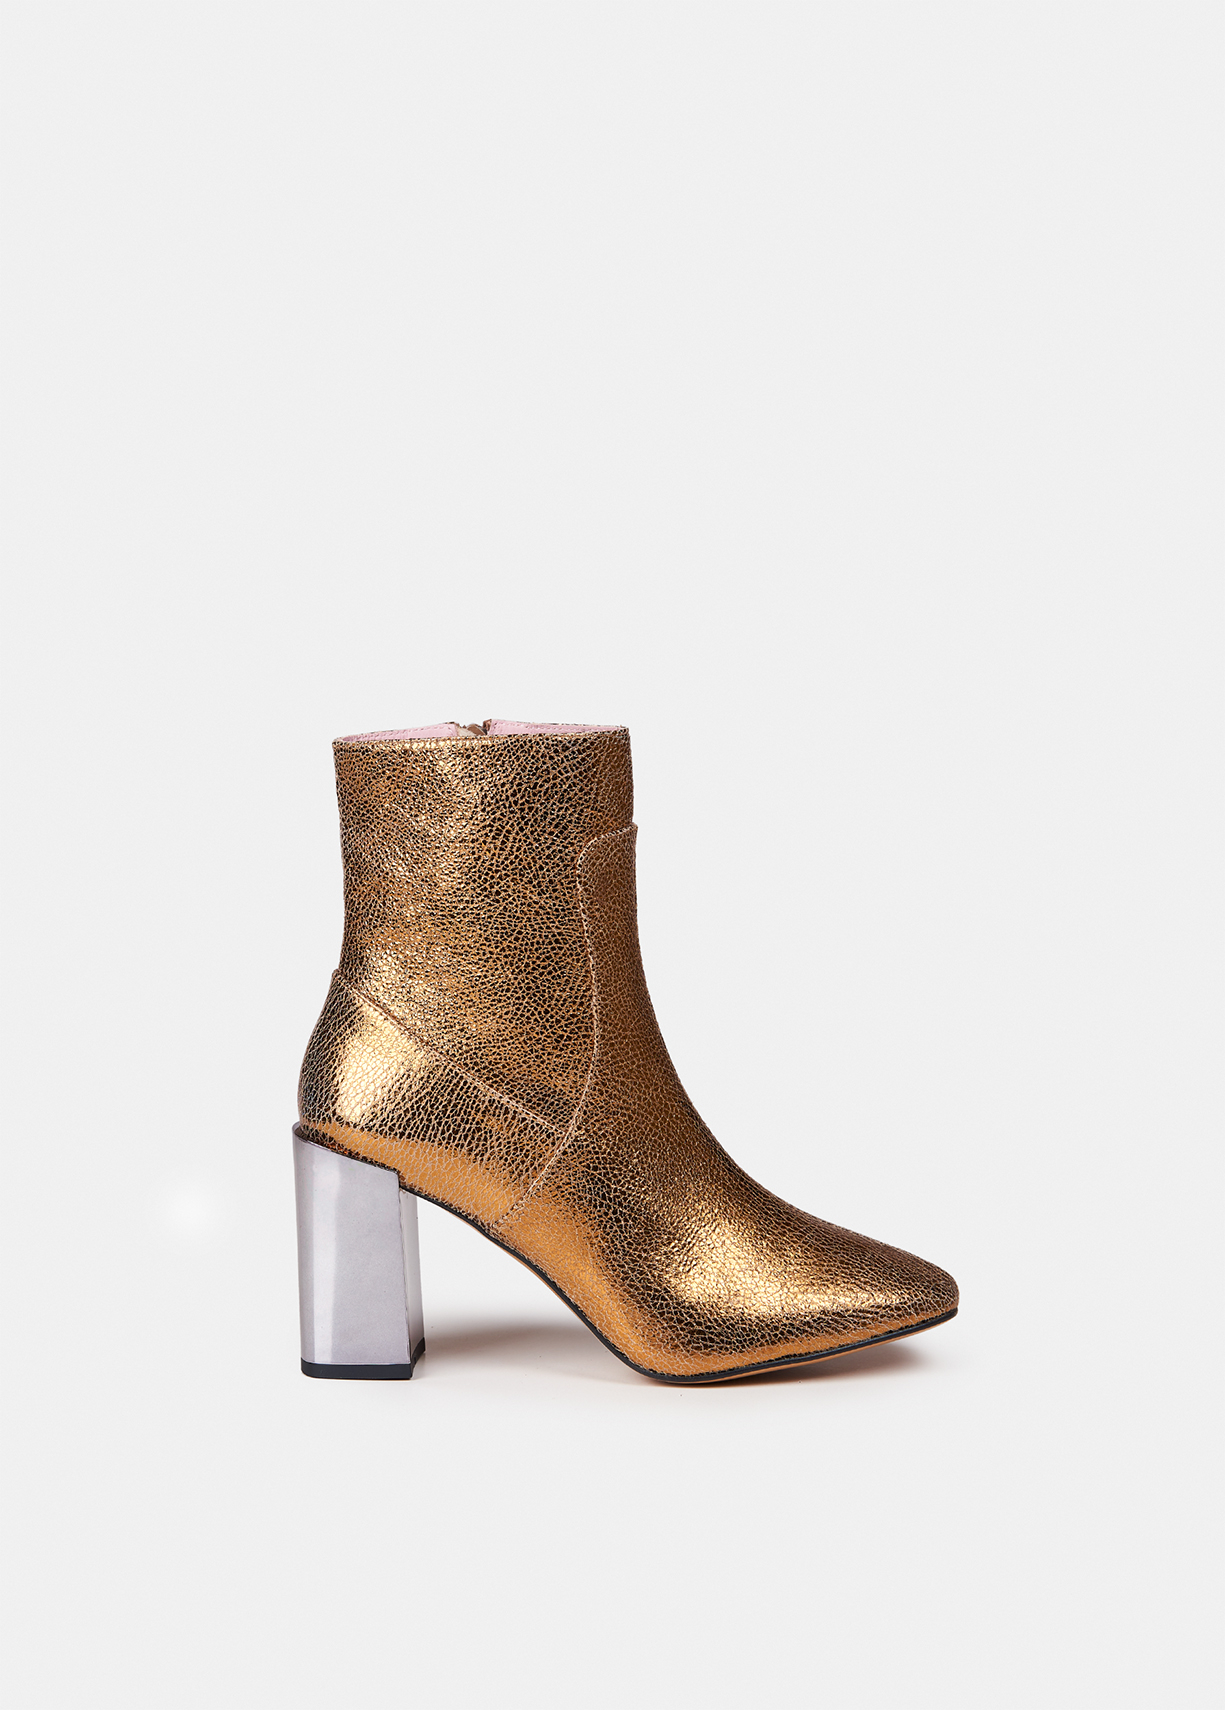 Gold leather ankle boots. - Essentiel 